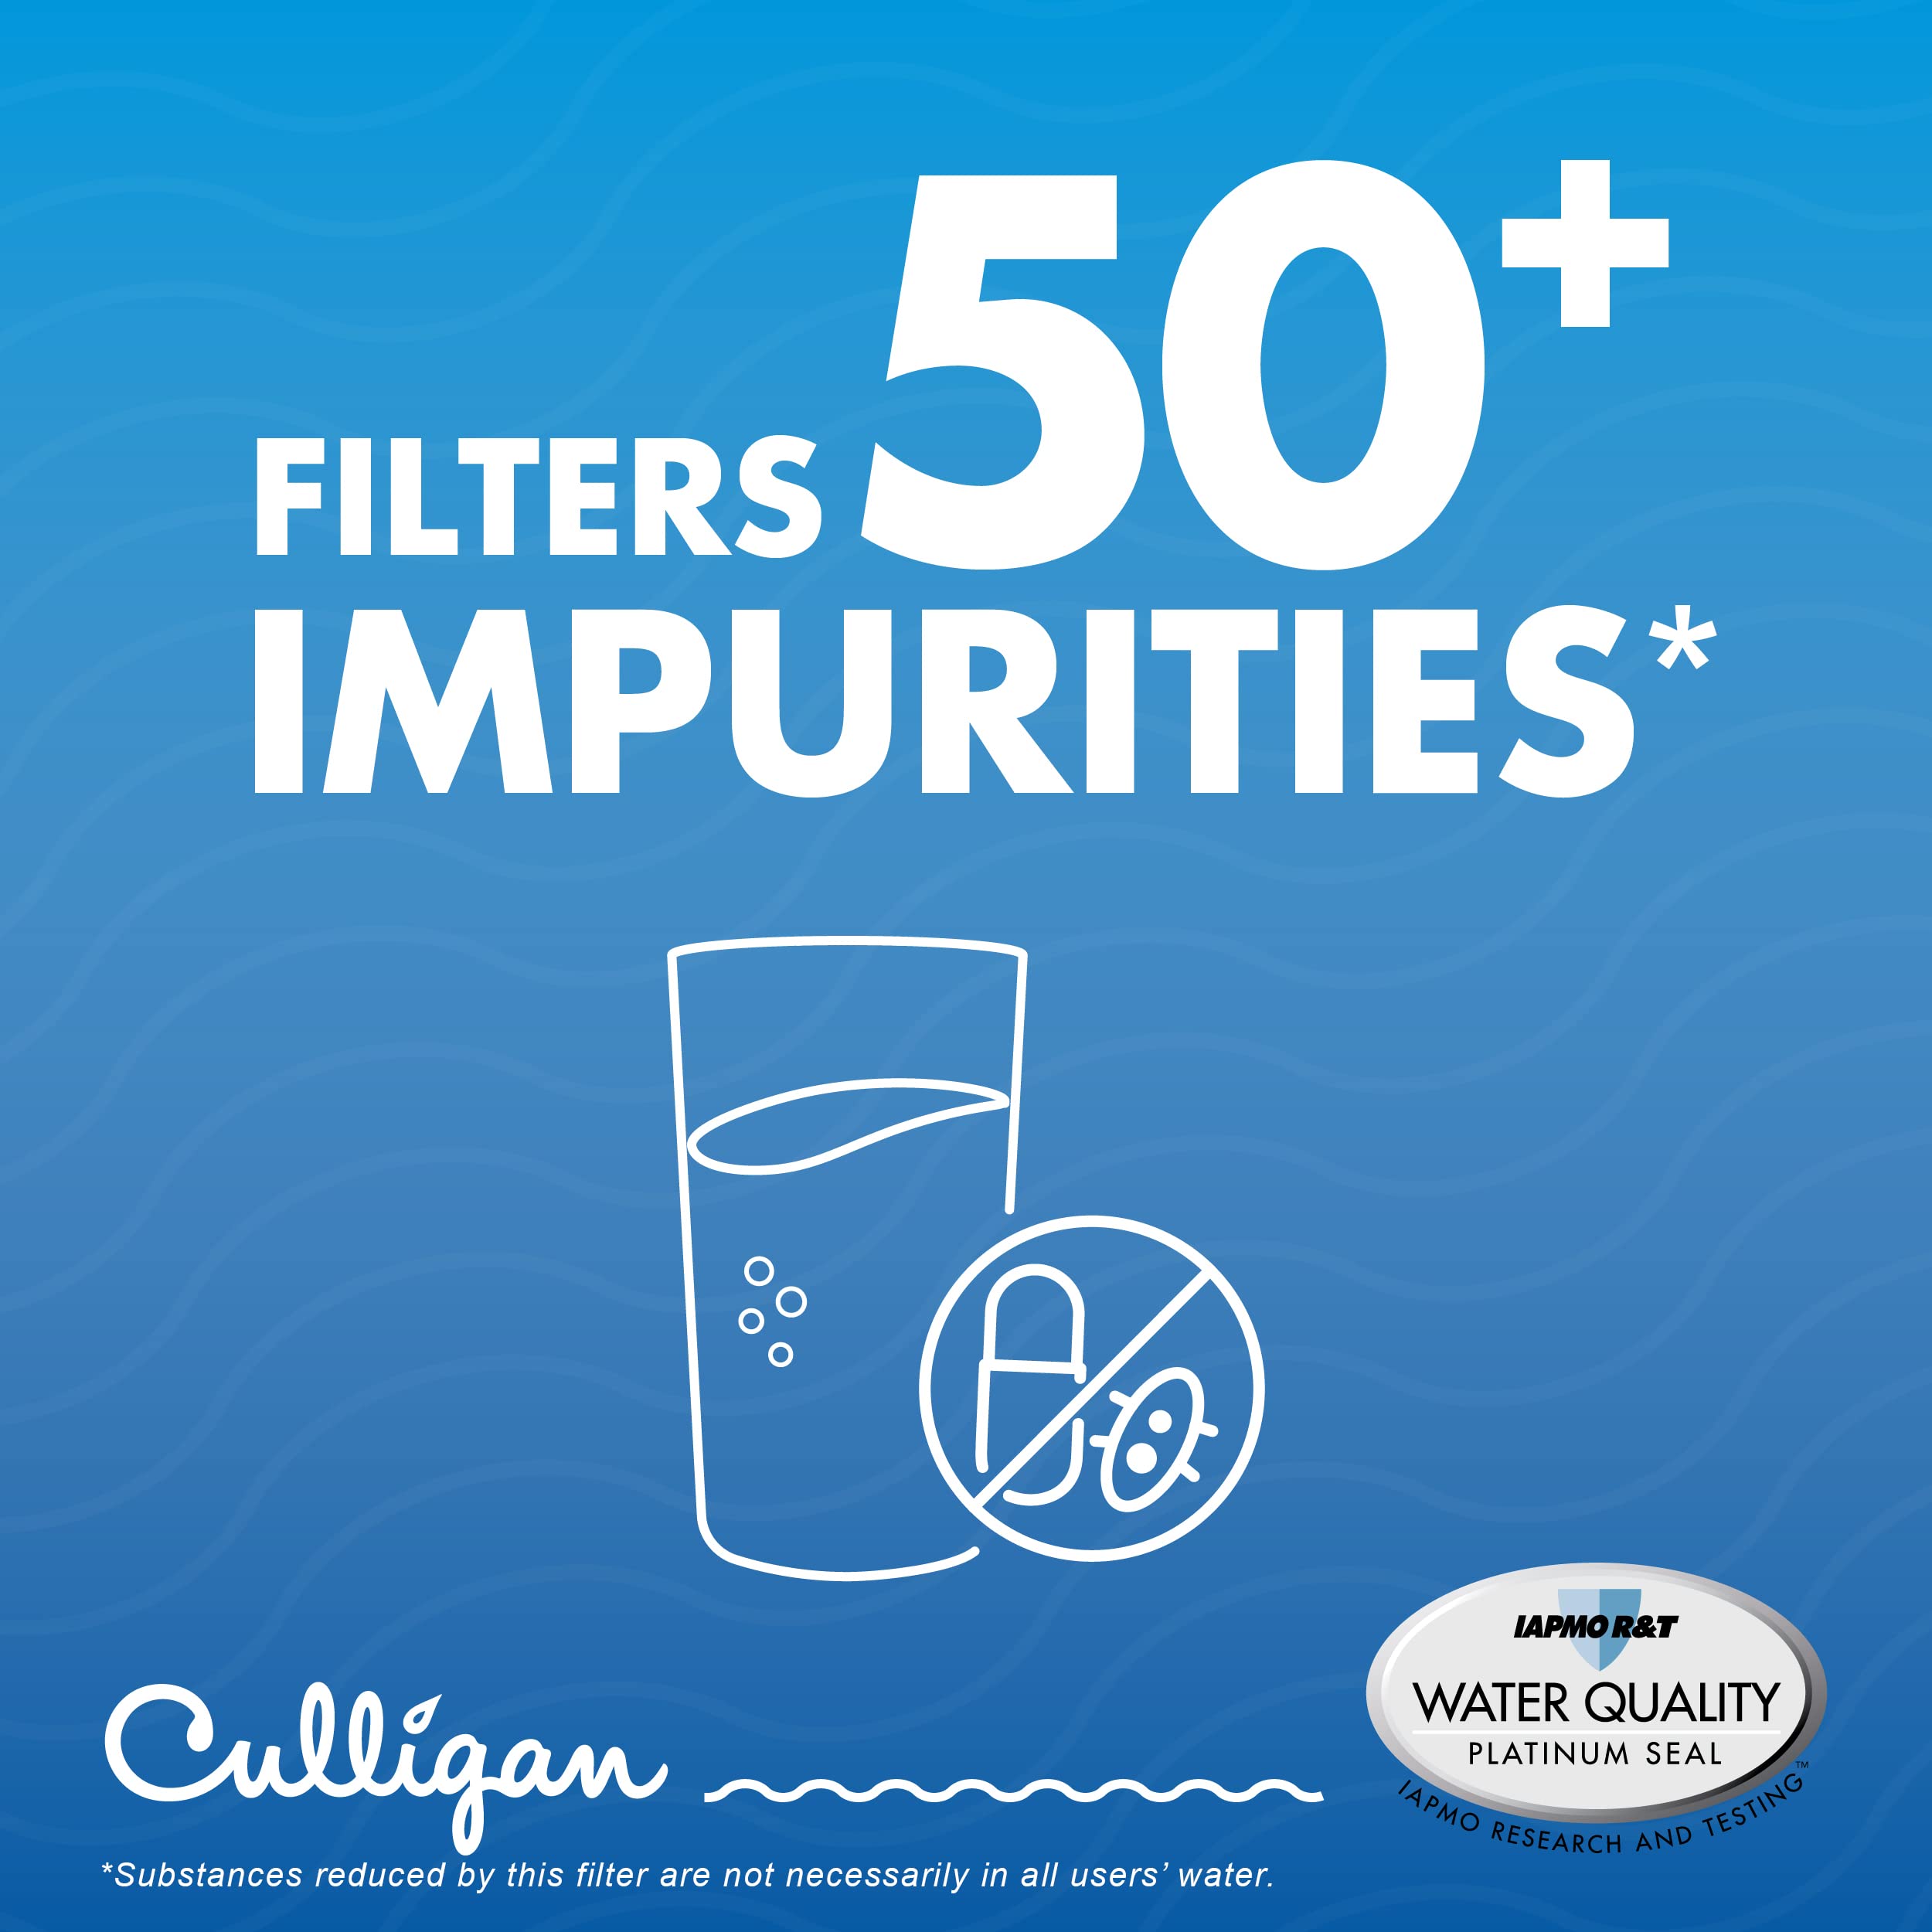 Culligan CUBC Refrigerator Water Filter | Replacement for Bosch Water Filter (BORPLFTR10) | Replace Every 6 Months | Pack of 1